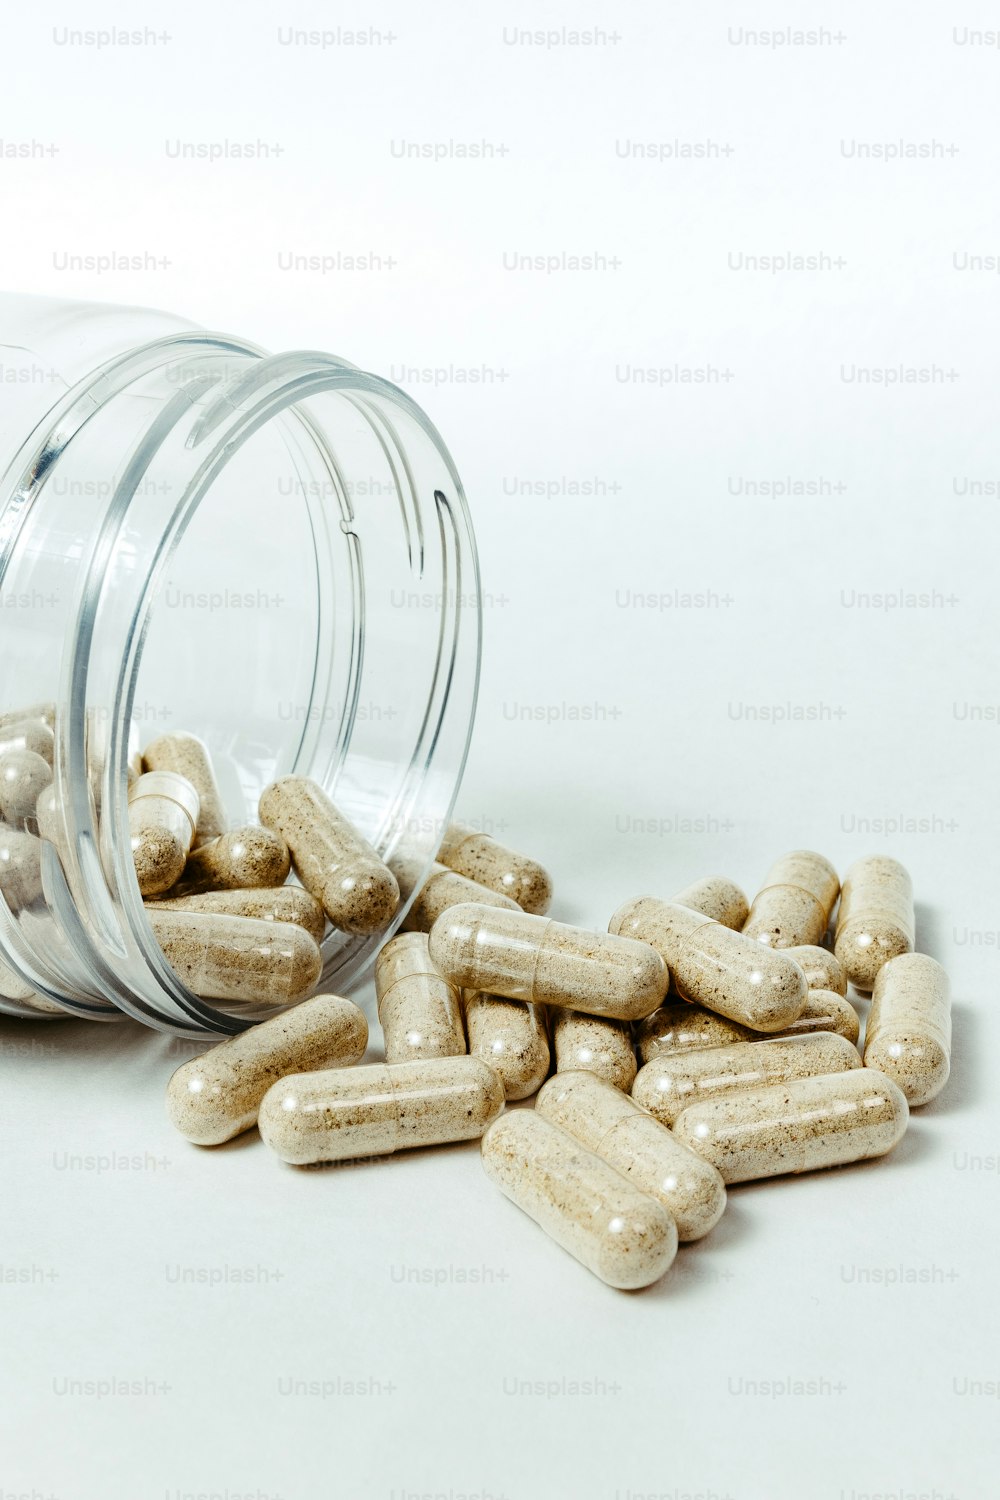 a glass jar filled with white pills on top of a table